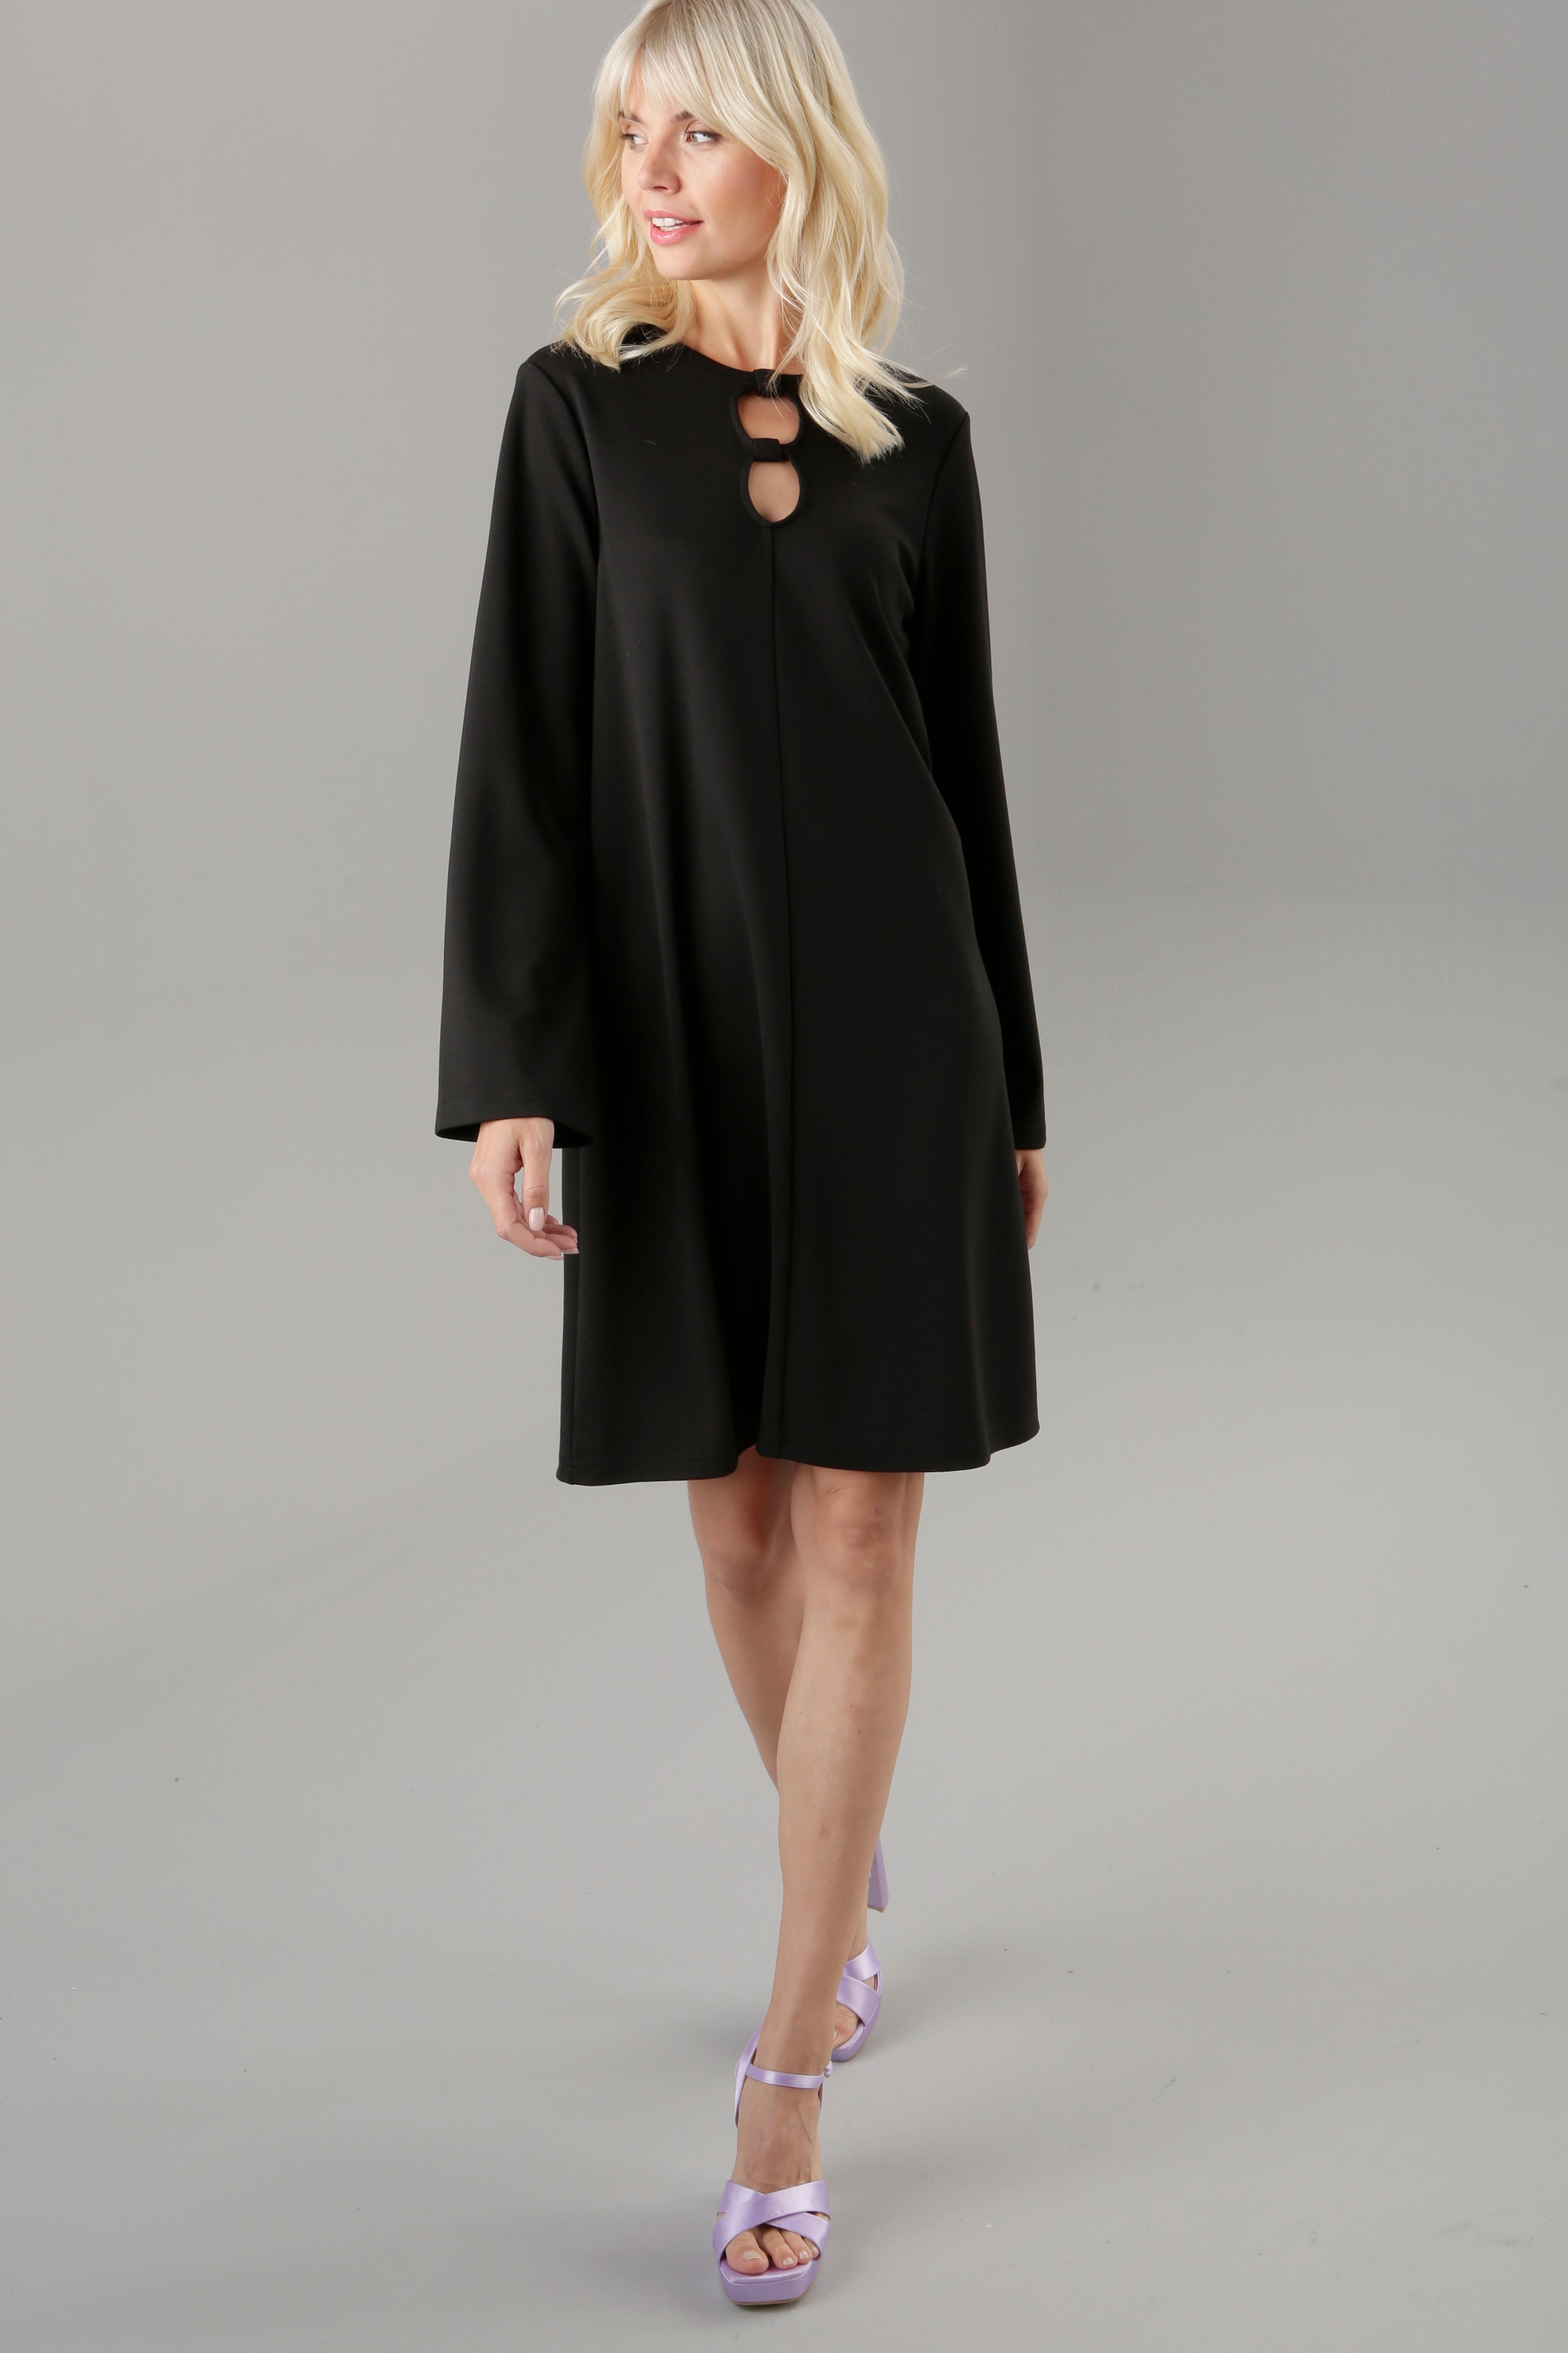 Aniston SELECTED Jerseykleid, mit kaufen online Cut-Outs